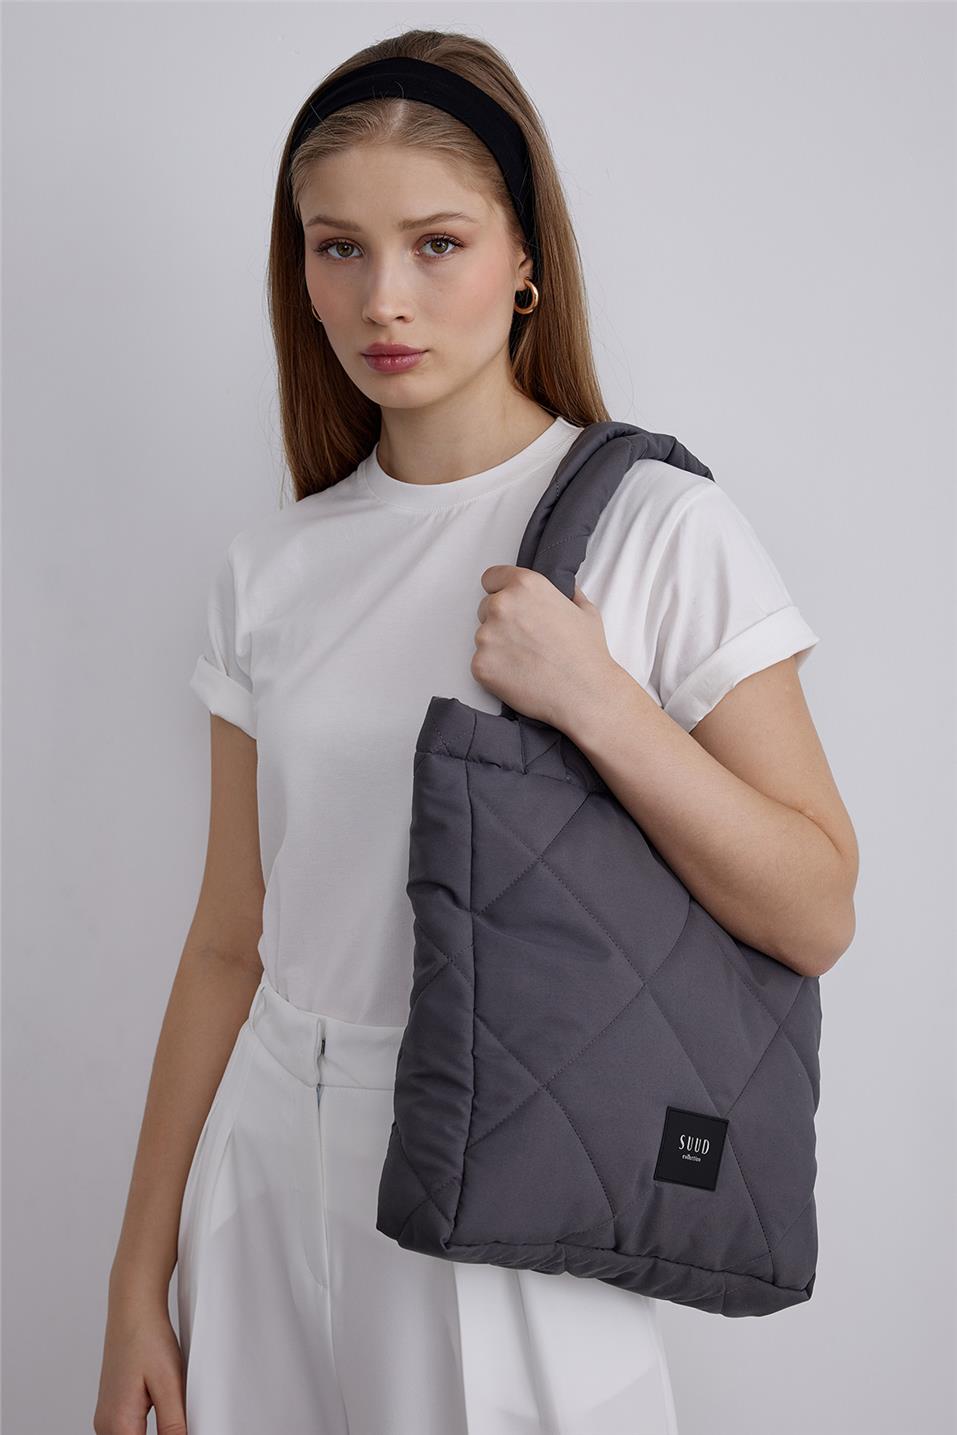 Smoked Quilted Puffer Bag